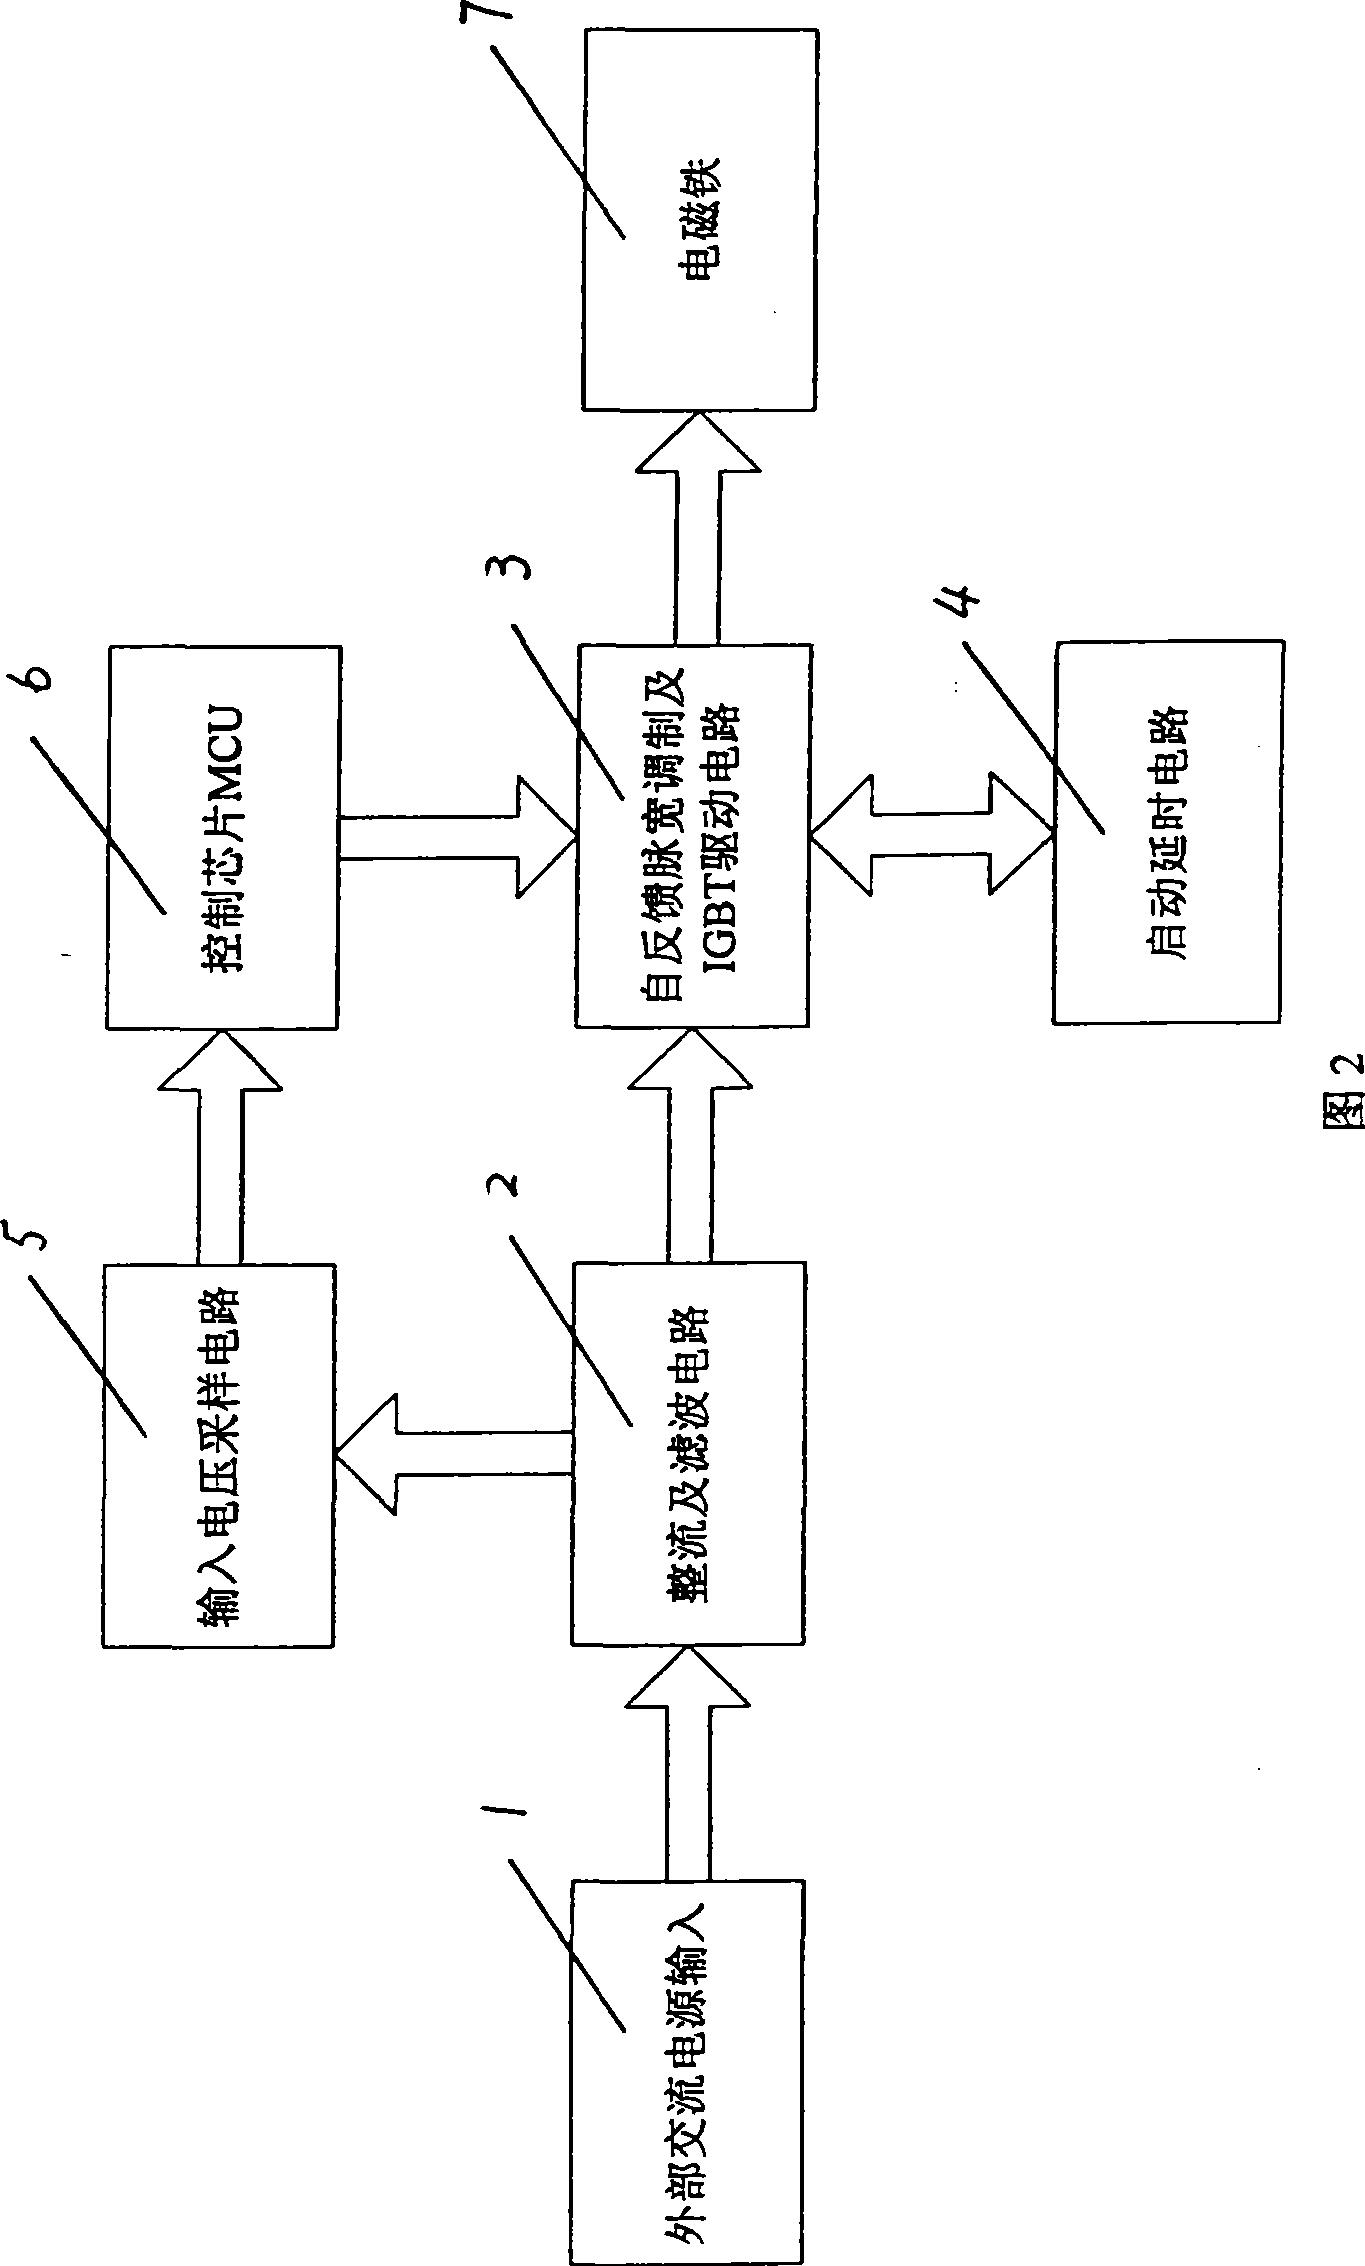 Control circuit for electromagnet of low-tension switch electric appliance